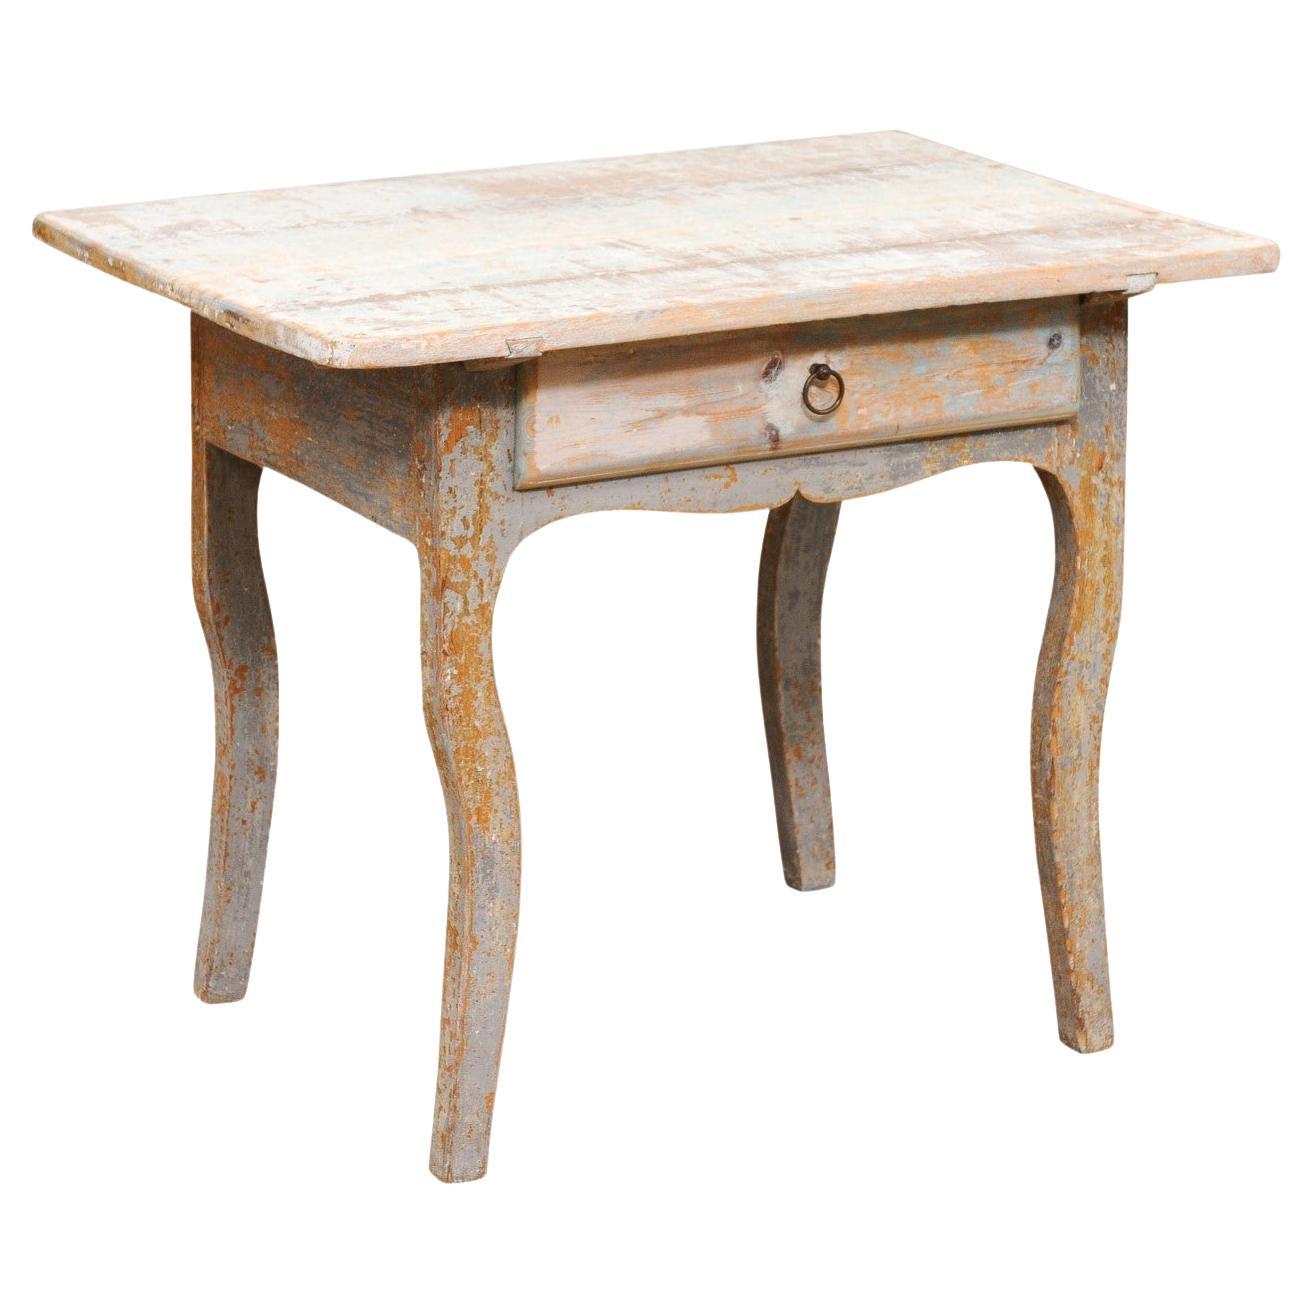 Swedish 1790s Folk Art Side Table with Drawer and Rococo Style Cabriole Legs